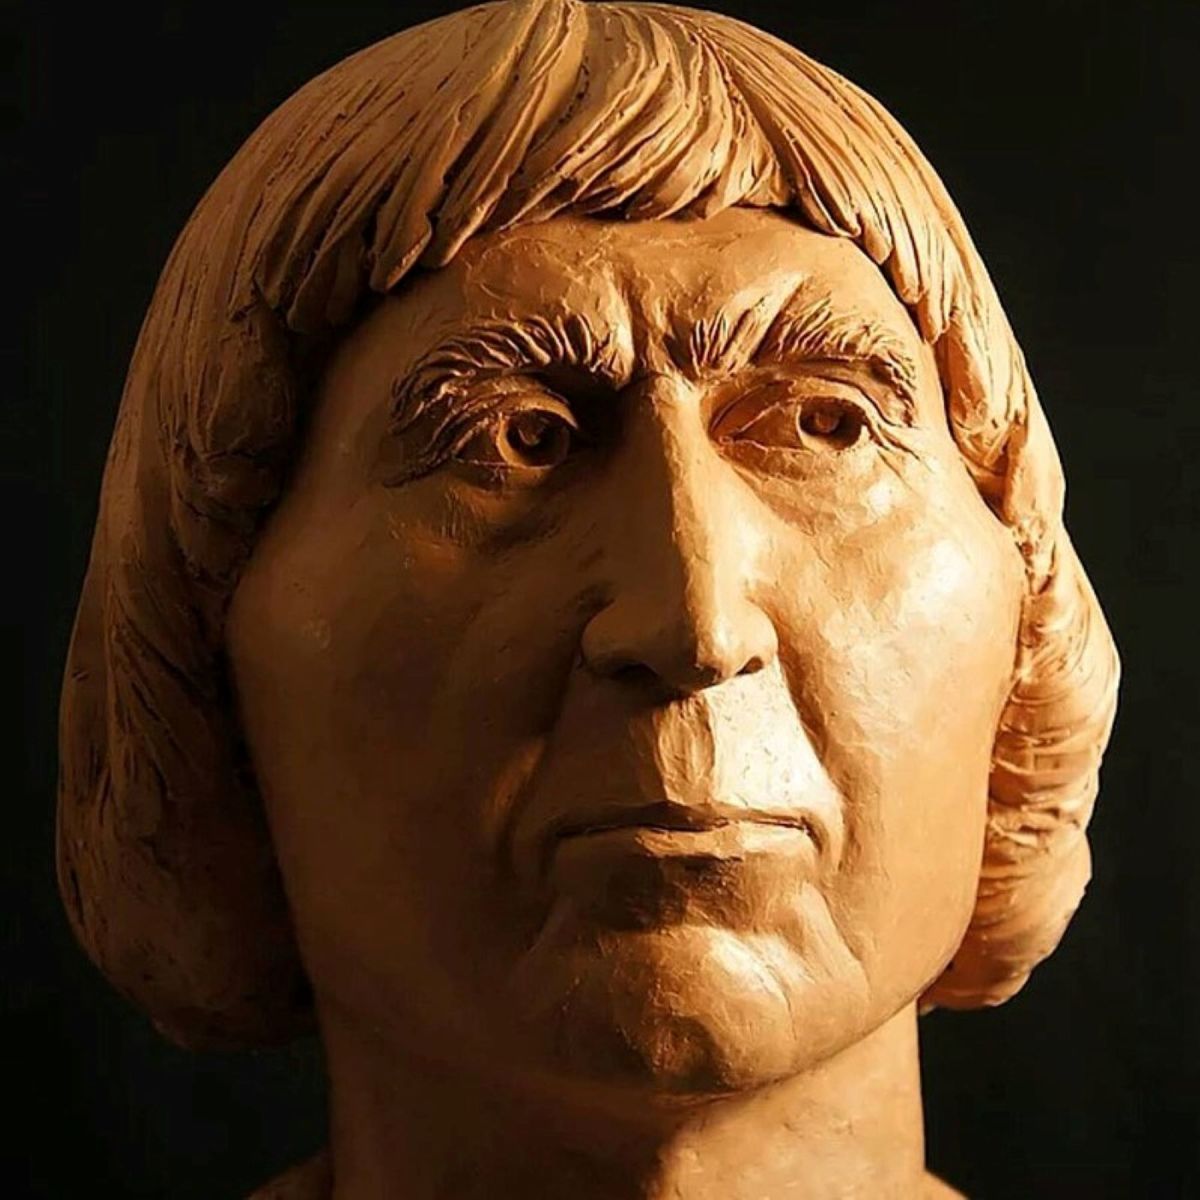 A reconstruction of Robert the Bruce's face.